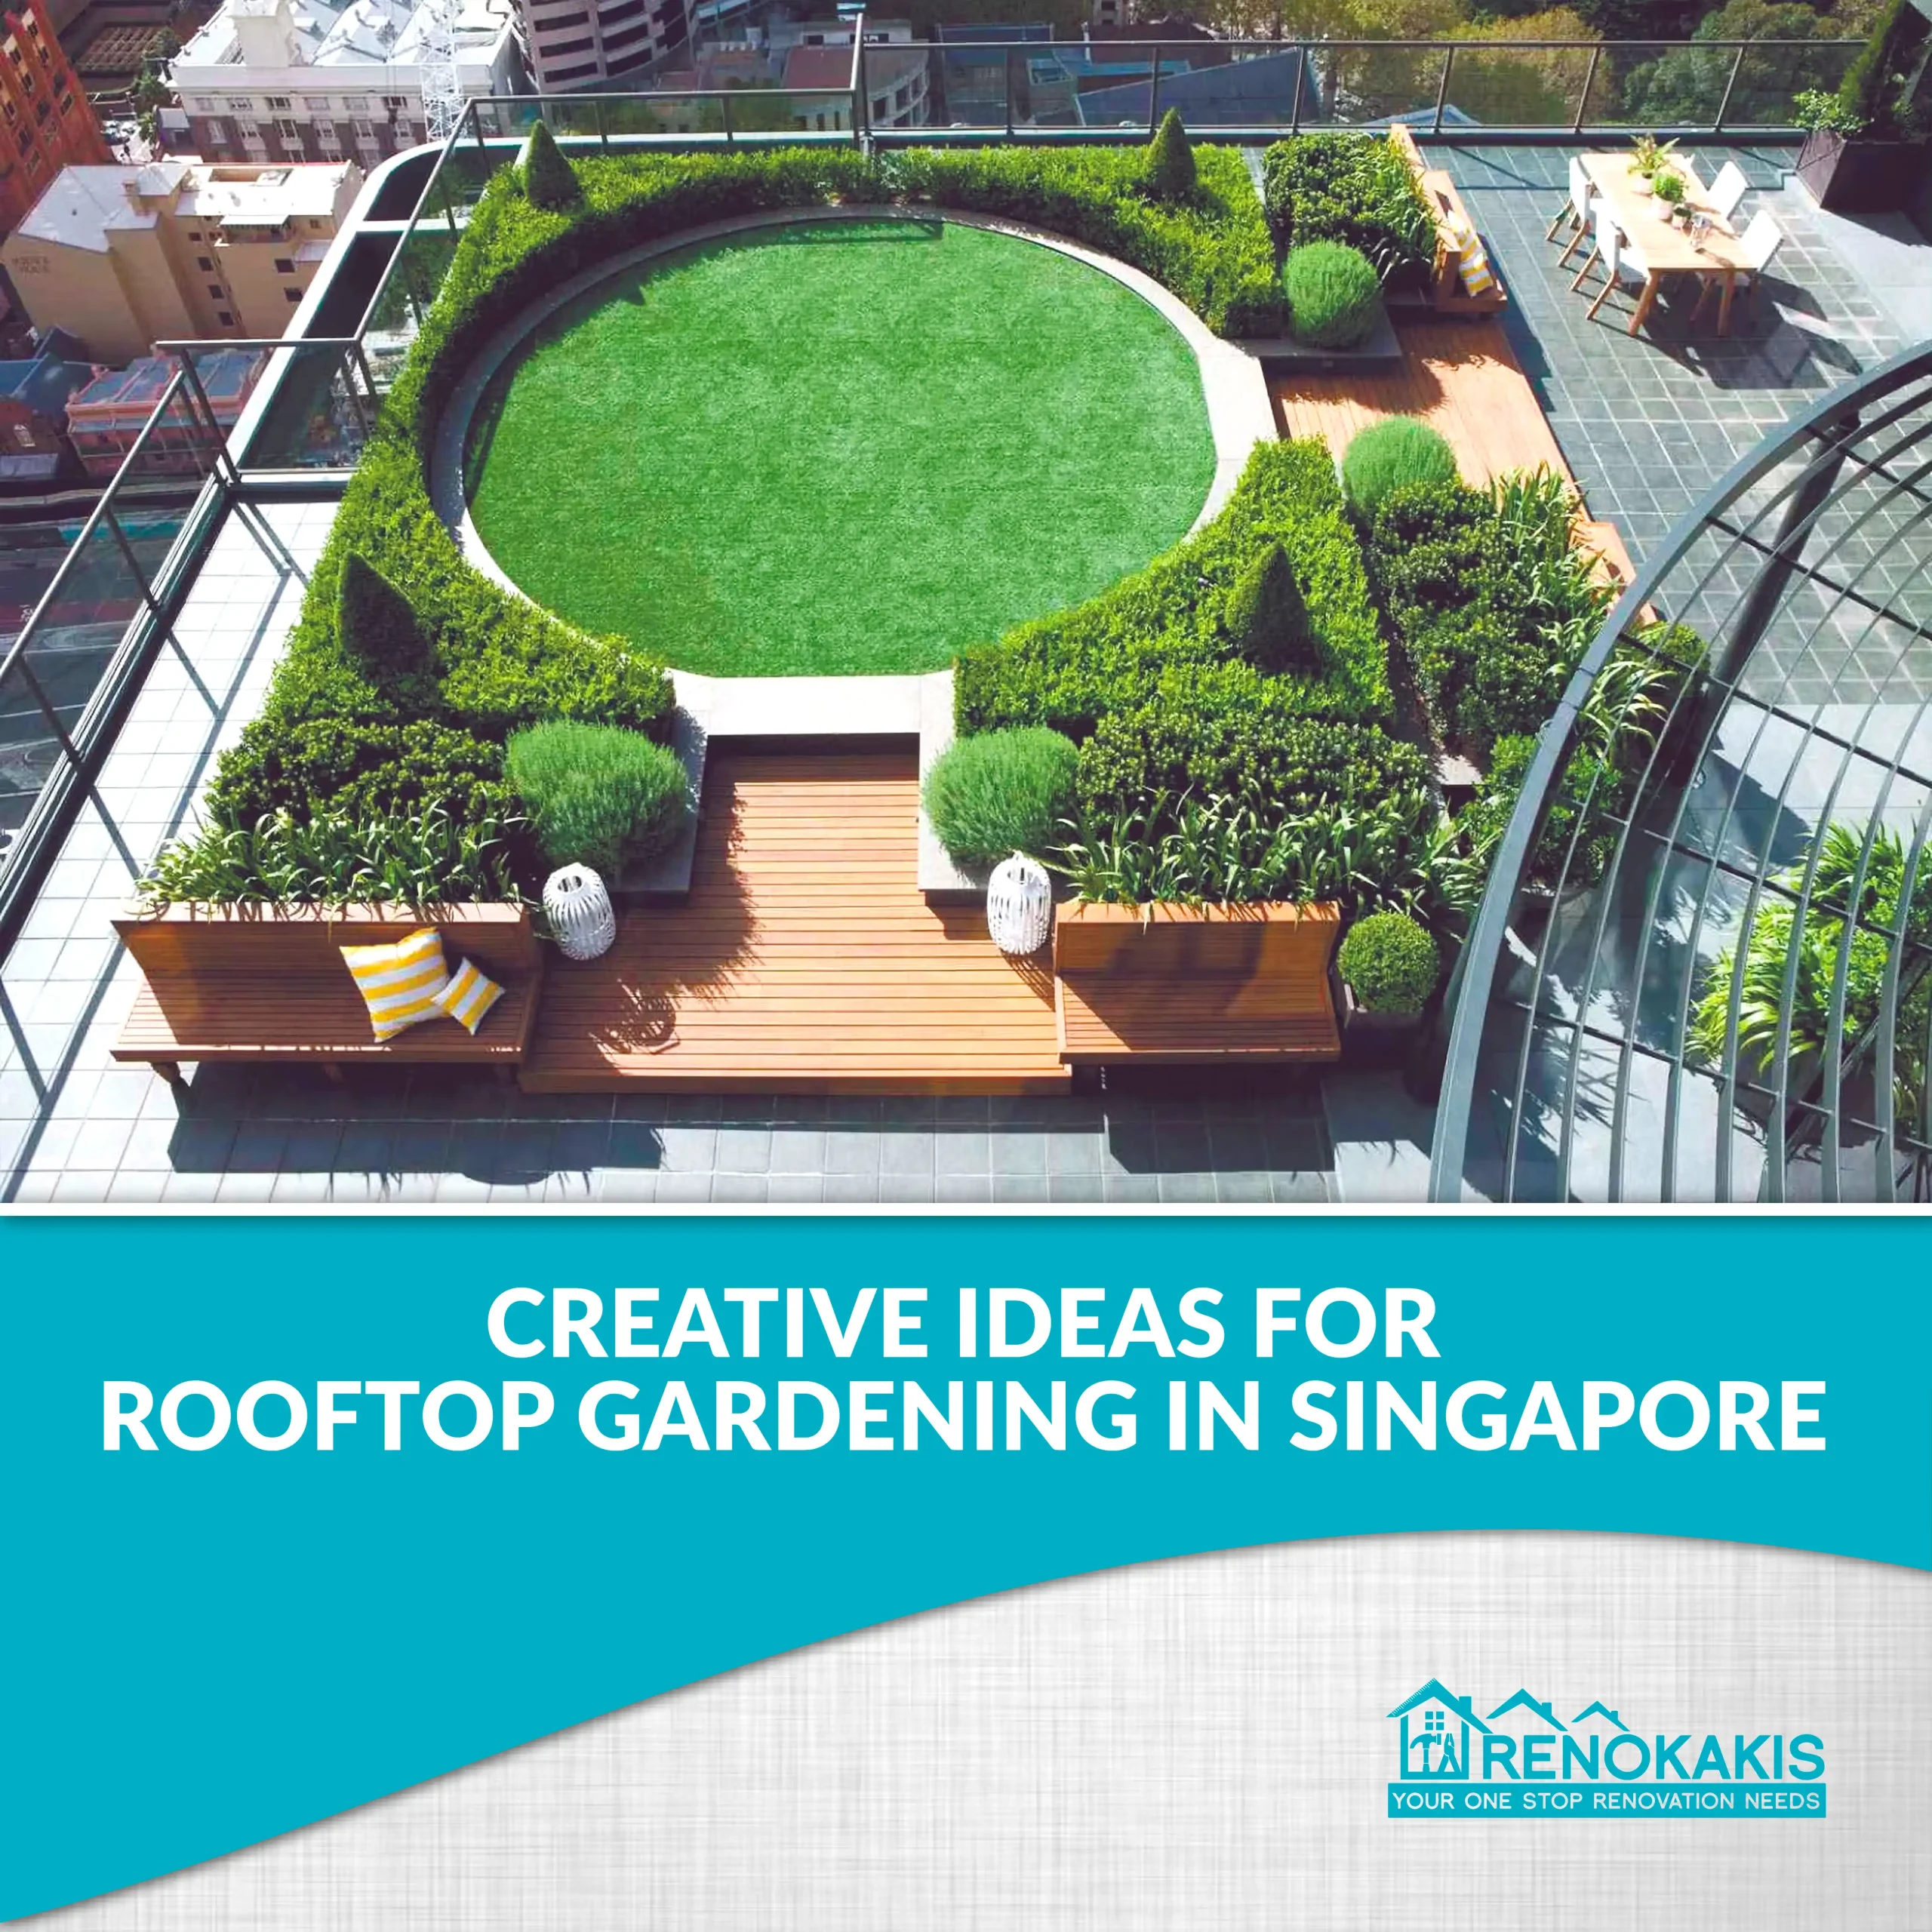 Creative Ideas for Rooftop Gardening in Singapore